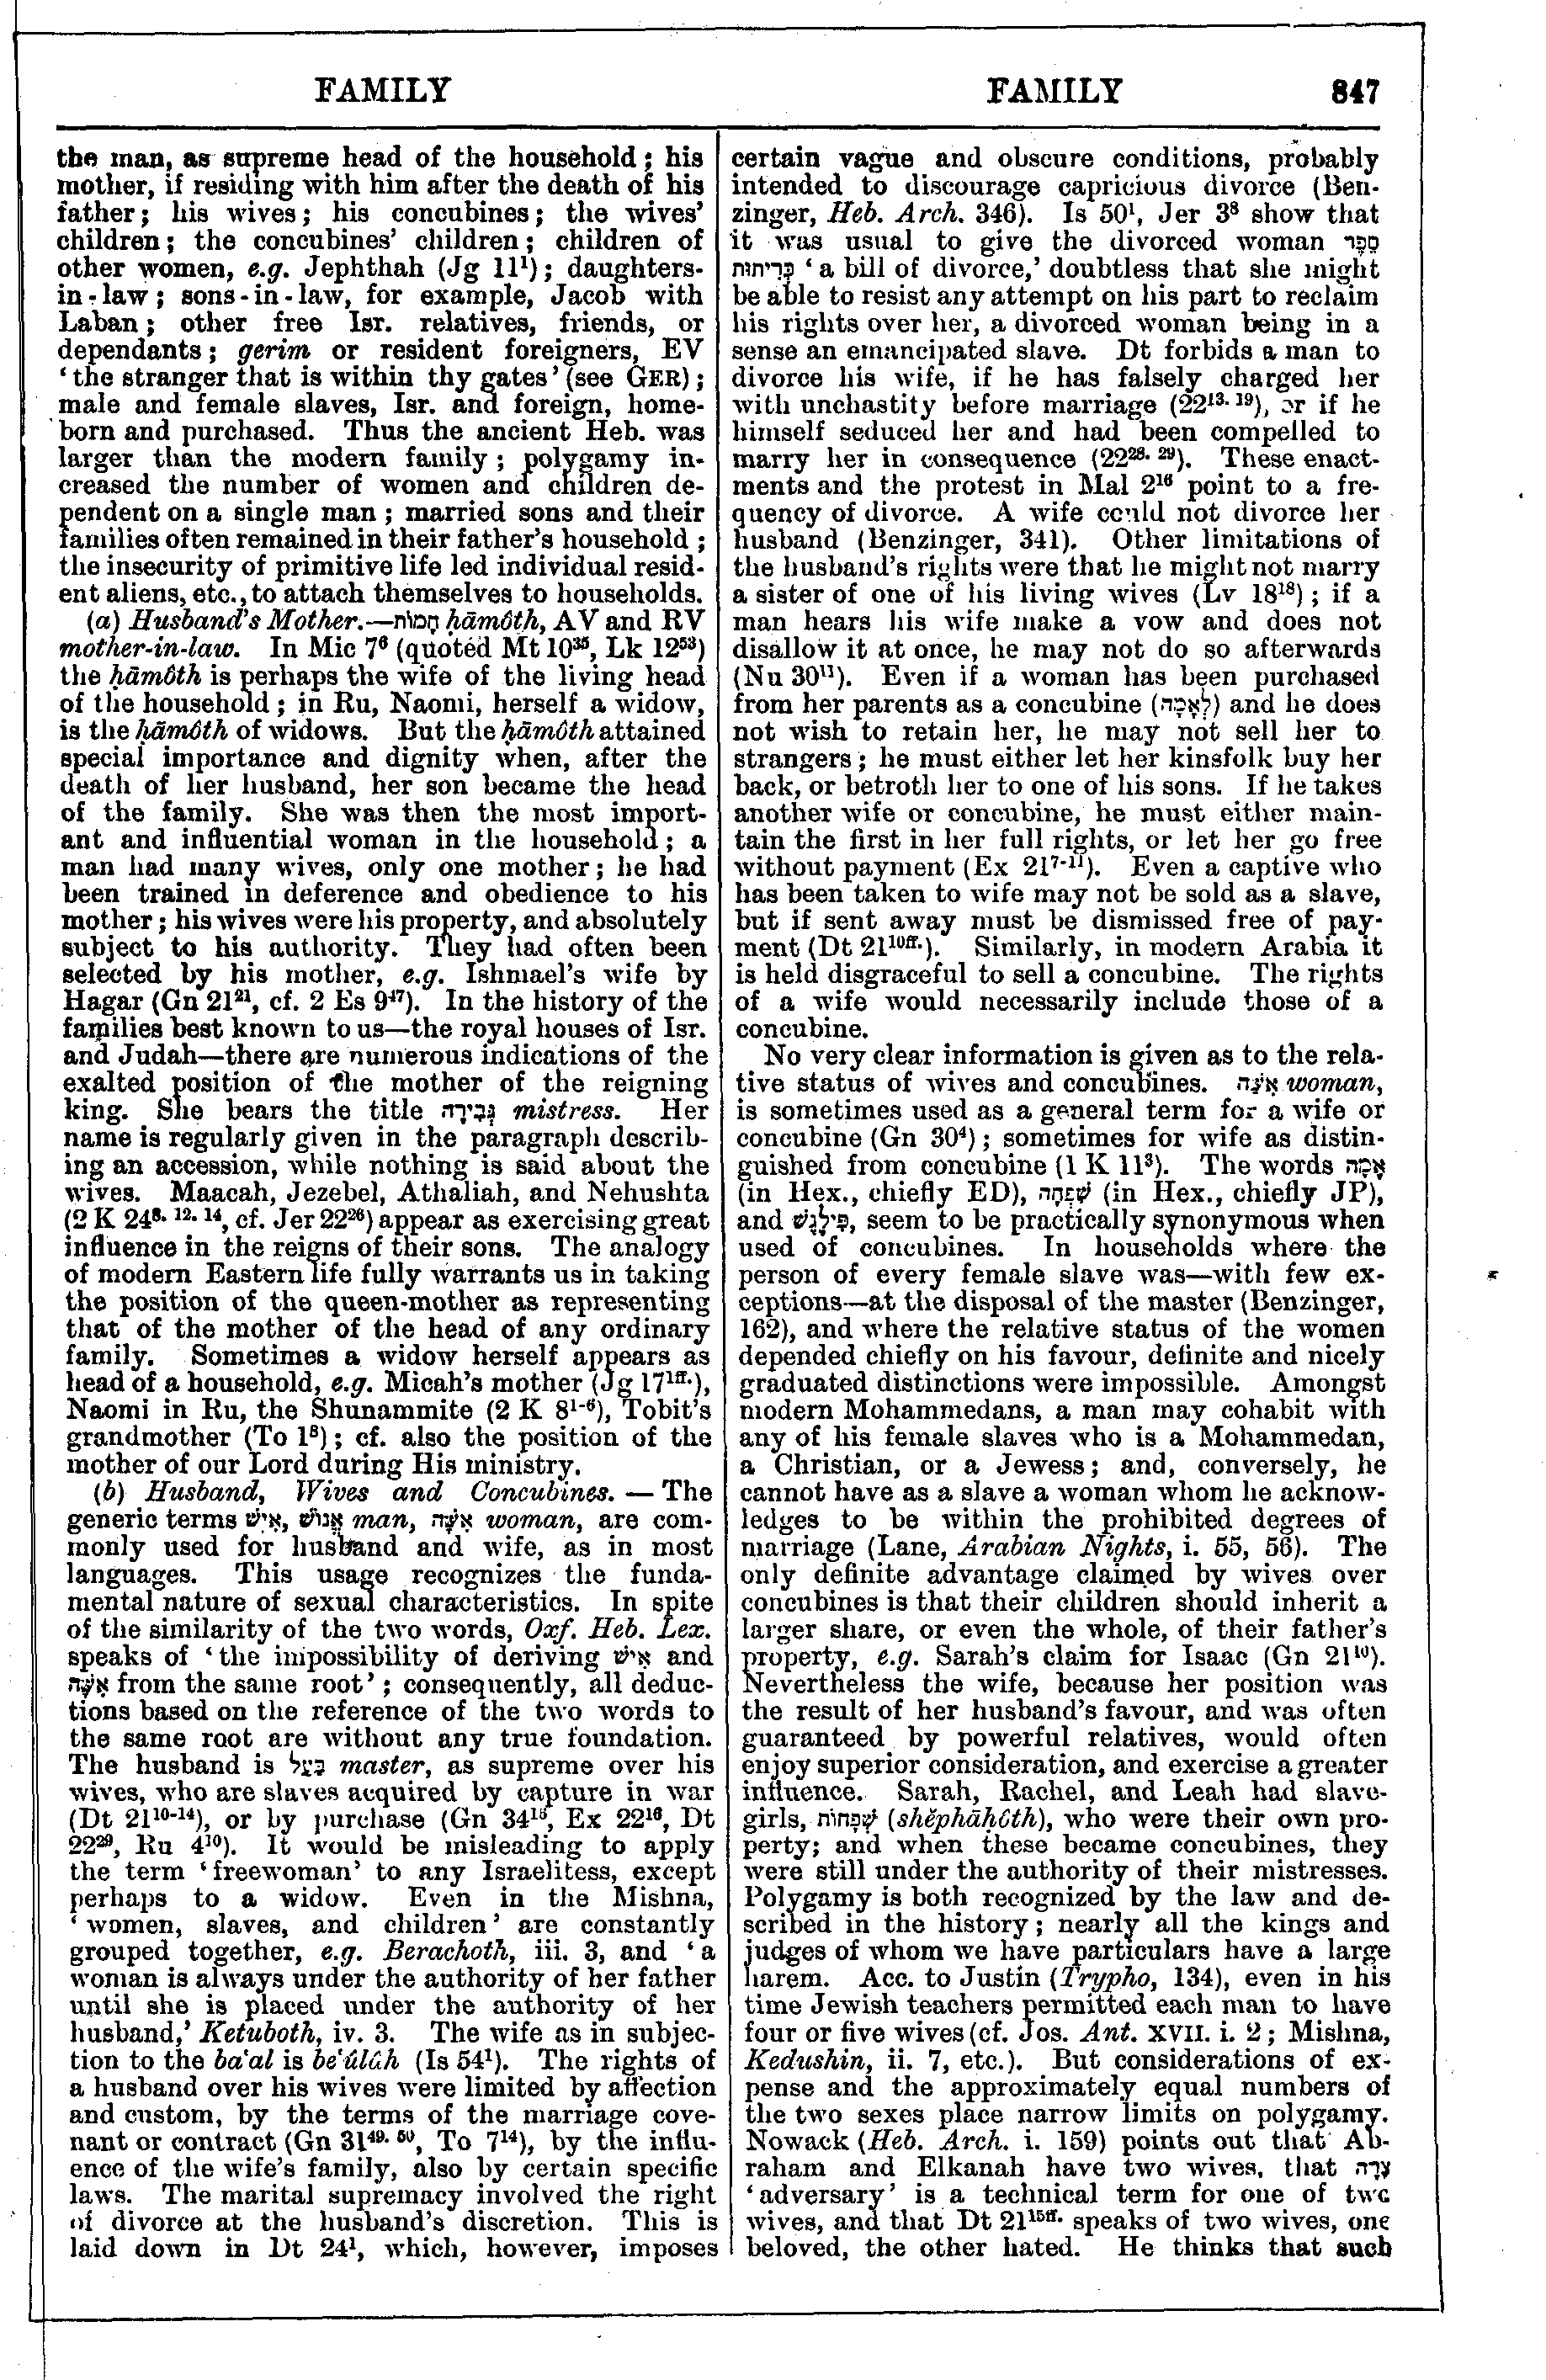 Image of page 847